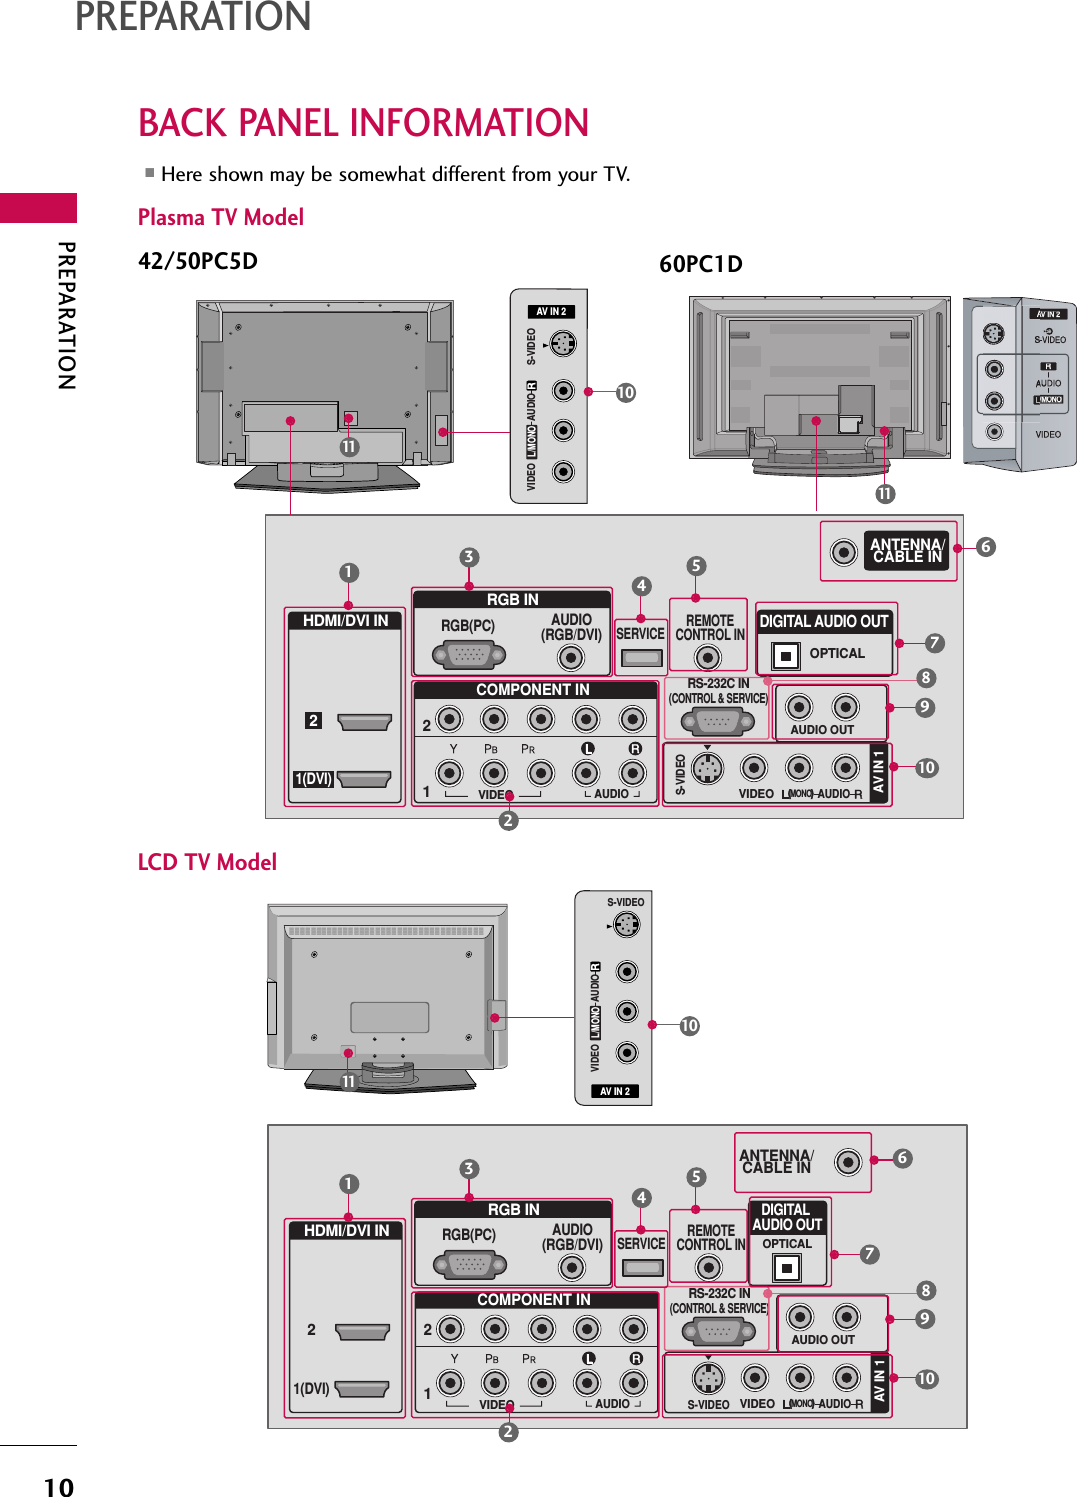 PREPARATION10BACK PANEL INFORMATIONPREPARATIONPlasma TV Model■Here shown may be somewhat different from your TV.VIDEOAUDIOVIDEOAUDIO(            )S-VIDEOAV IN 1AV OUTCOMPONENT INVIDEOAUDIOVIDEOAUDIO(            )S-VIDEOAV IN 1AV OUTCOMPONENT INAV IN 2/MONOR60PC1D42/50PC5DLCD TV ModelAV IN 2L/MONORAUDIOVIDEOS-VIDEO(            )RRGB INHDMI/DVI INCOMPONENT INAUDIO(RGB/DVI)RGB(PC)REMOTECONTROL IN12RS-232C IN(CONTROL &amp; SERVICE)VIDEOAUDIOVIDEOAUDIO OUTMONO(                        )AUDIOS-VIDEOAV IN 1SERVICE21(DVI)ANTENNA/CABLE INOPTICALDIGITAL AUDIO OUT101111AV IN 2L/MONORAUDIOVIDEOS-VIDEO(            )13548679210RRGB INHDMI/DVI INCOMPONENT INAUDIO(RGB/DVI)RGB(PC)REMOTECONTROL INANTENNA/CABLE IN1(DVI)122RS-232C IN(CONTROL &amp; SERVICE)VIDEOAUDIOVIDEOAUDIO OUTOPTICALMONO(                        )AUDIOS-VIDEODIGITAL AUDIO OUTAV IN 1SERVICE135467921081011